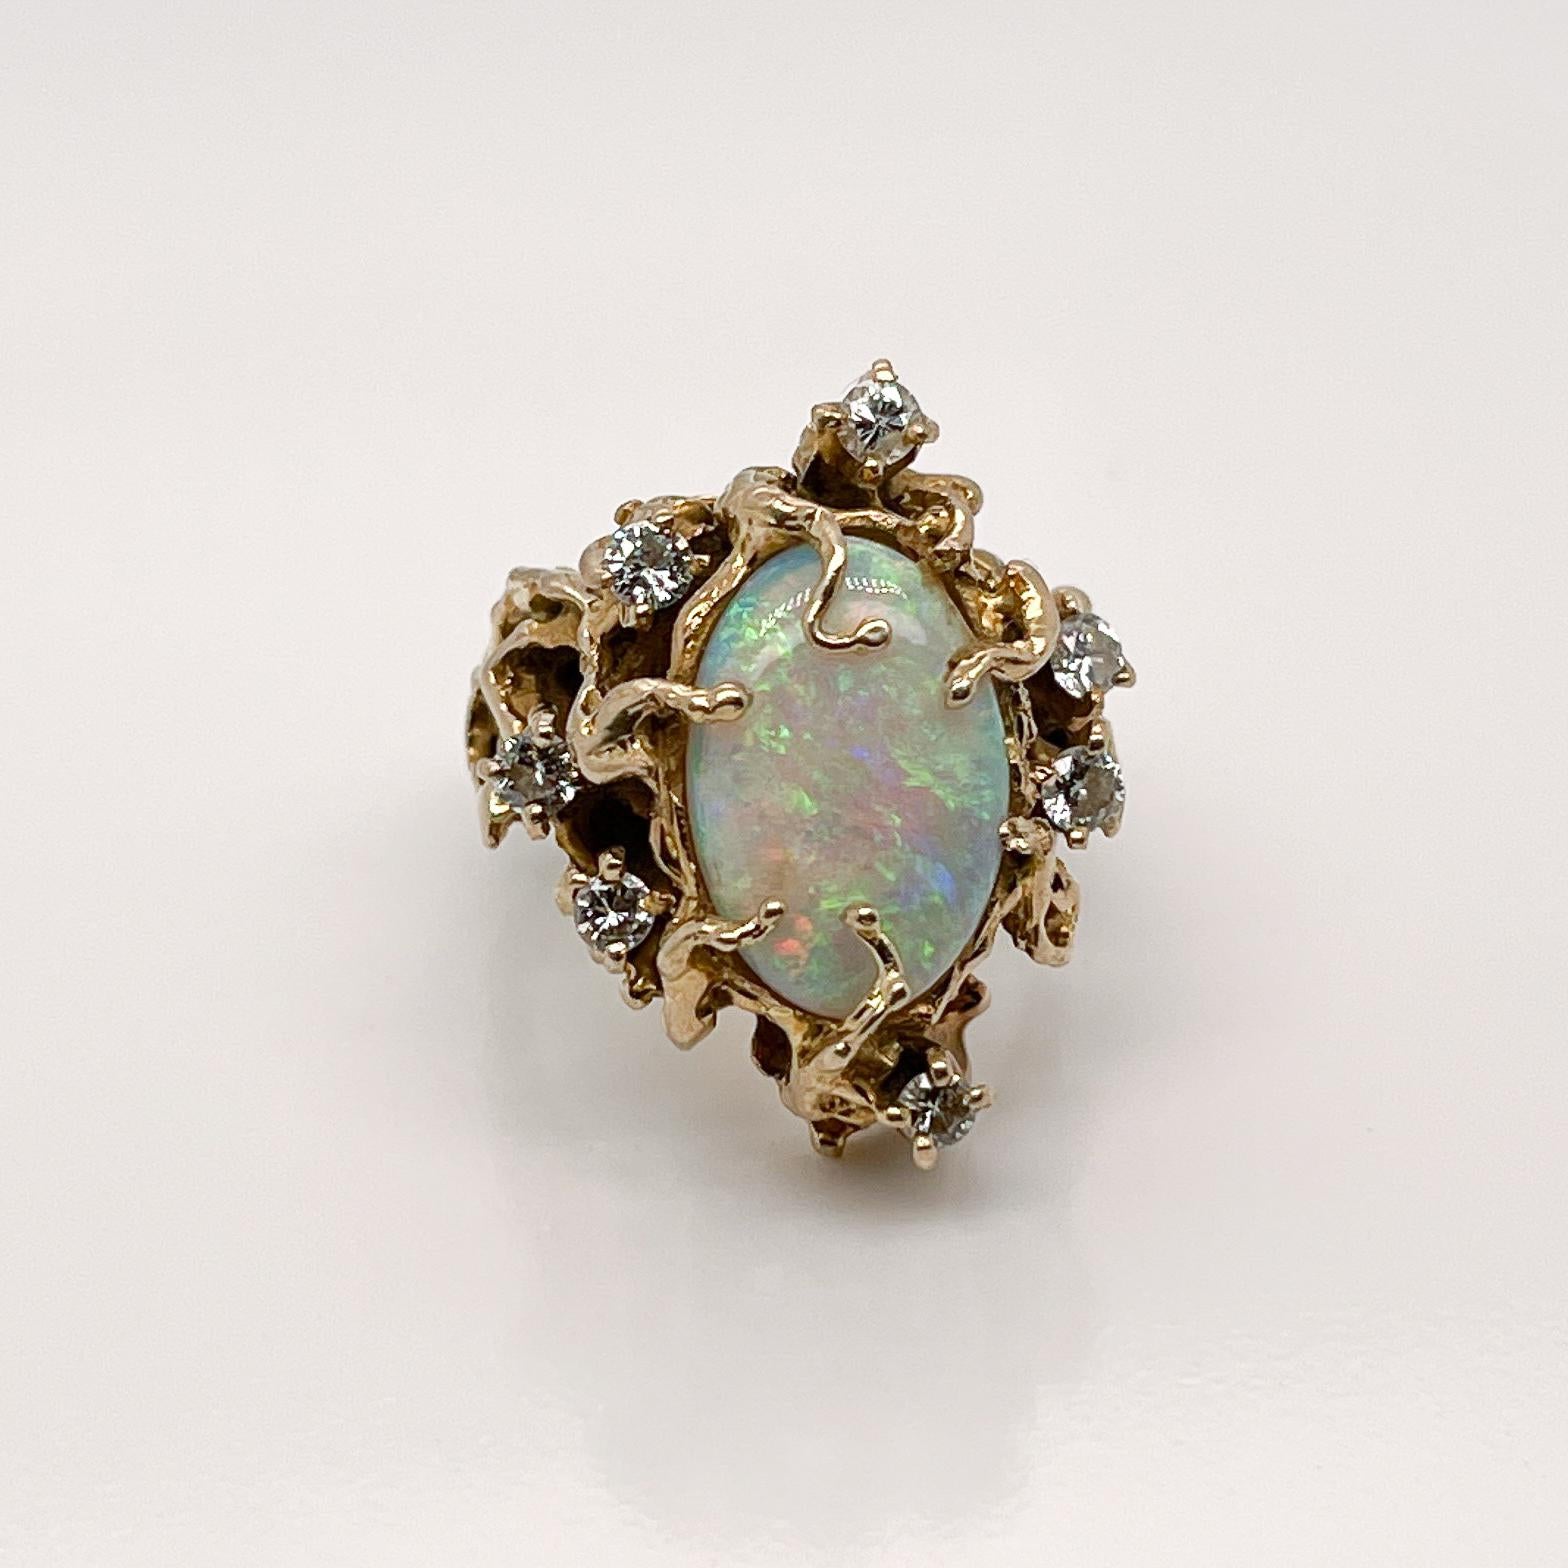 A very fine signed Brutalist opal and diamond ring.

With a large oval opal cabochon prong set in an organic, cast 14k gold setting. 

The opal is framed by seven small prong set round brilliant diamonds.

Simply a wonderful Brutalist ring!